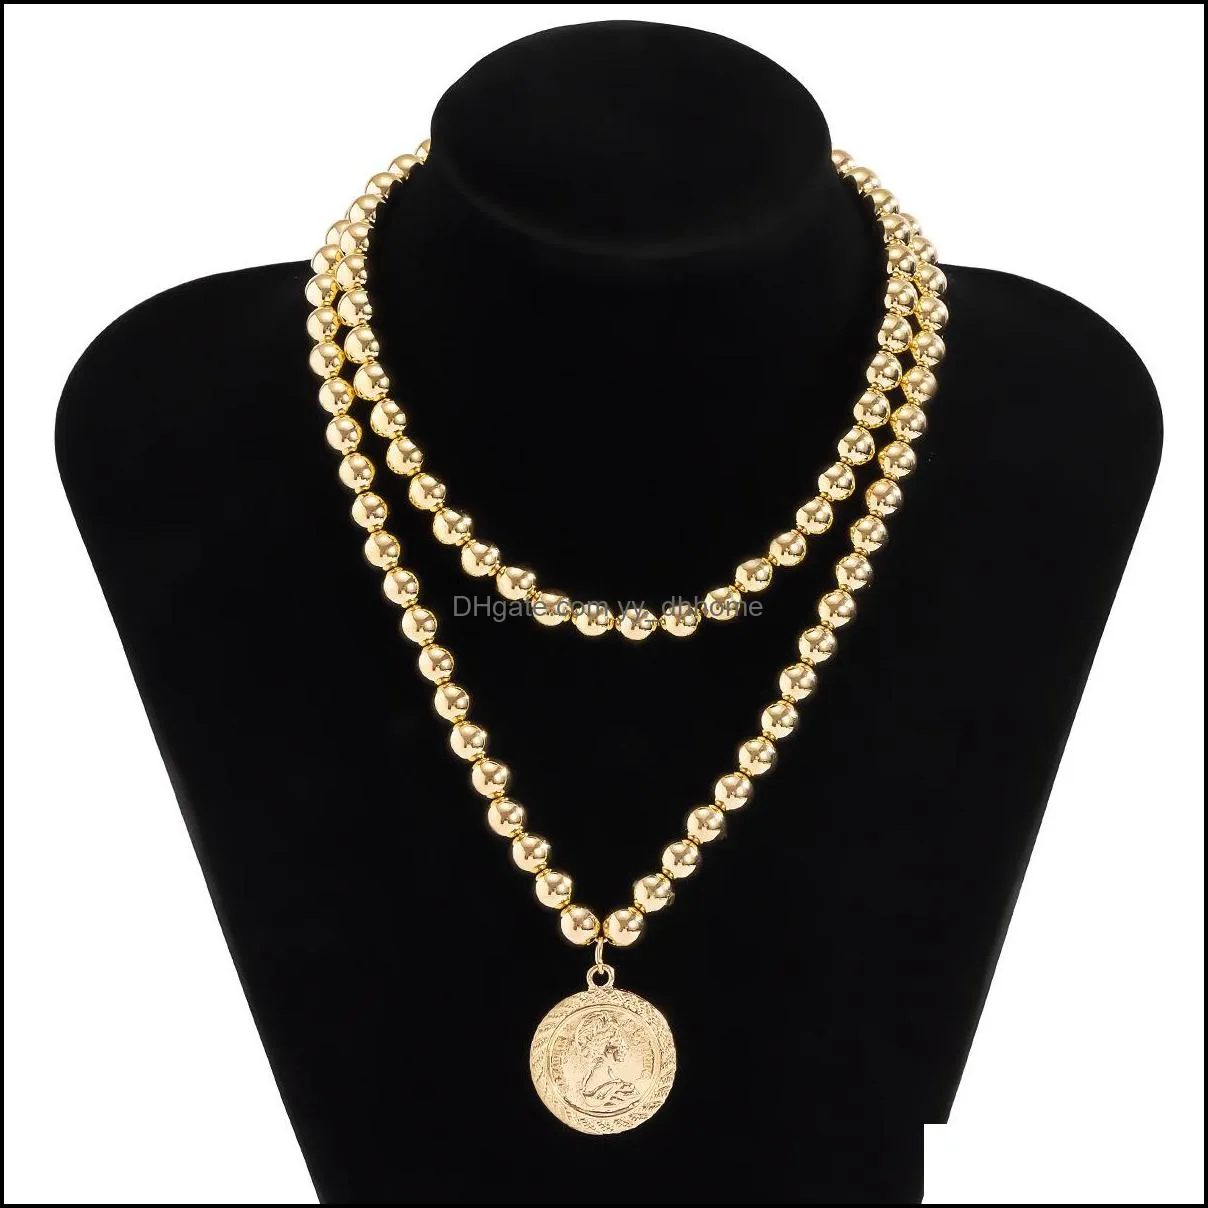 Portrait Coin Alloy Pendant Necklaces Retro Golden Card Neck Imitation Pearl Clavicle Chain Hip Hop Multi-layer Fashion Creative Round Bead Necklace Jewelry